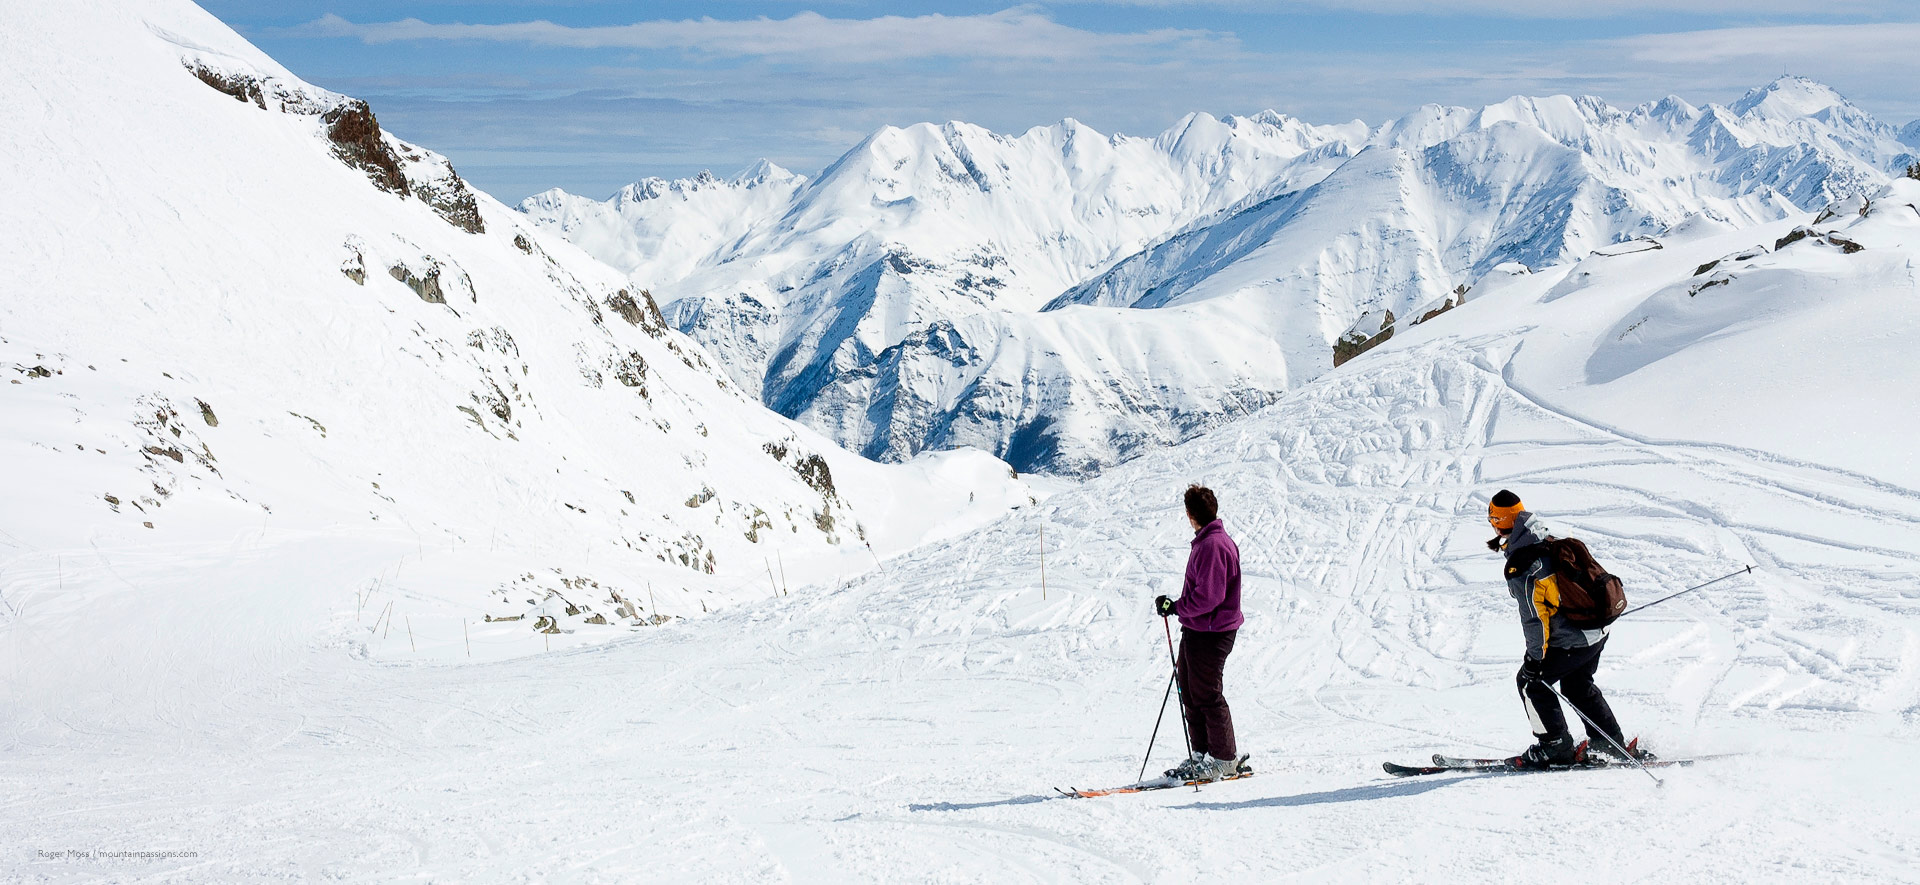 Two skiers on high altitude piste with big mountain views